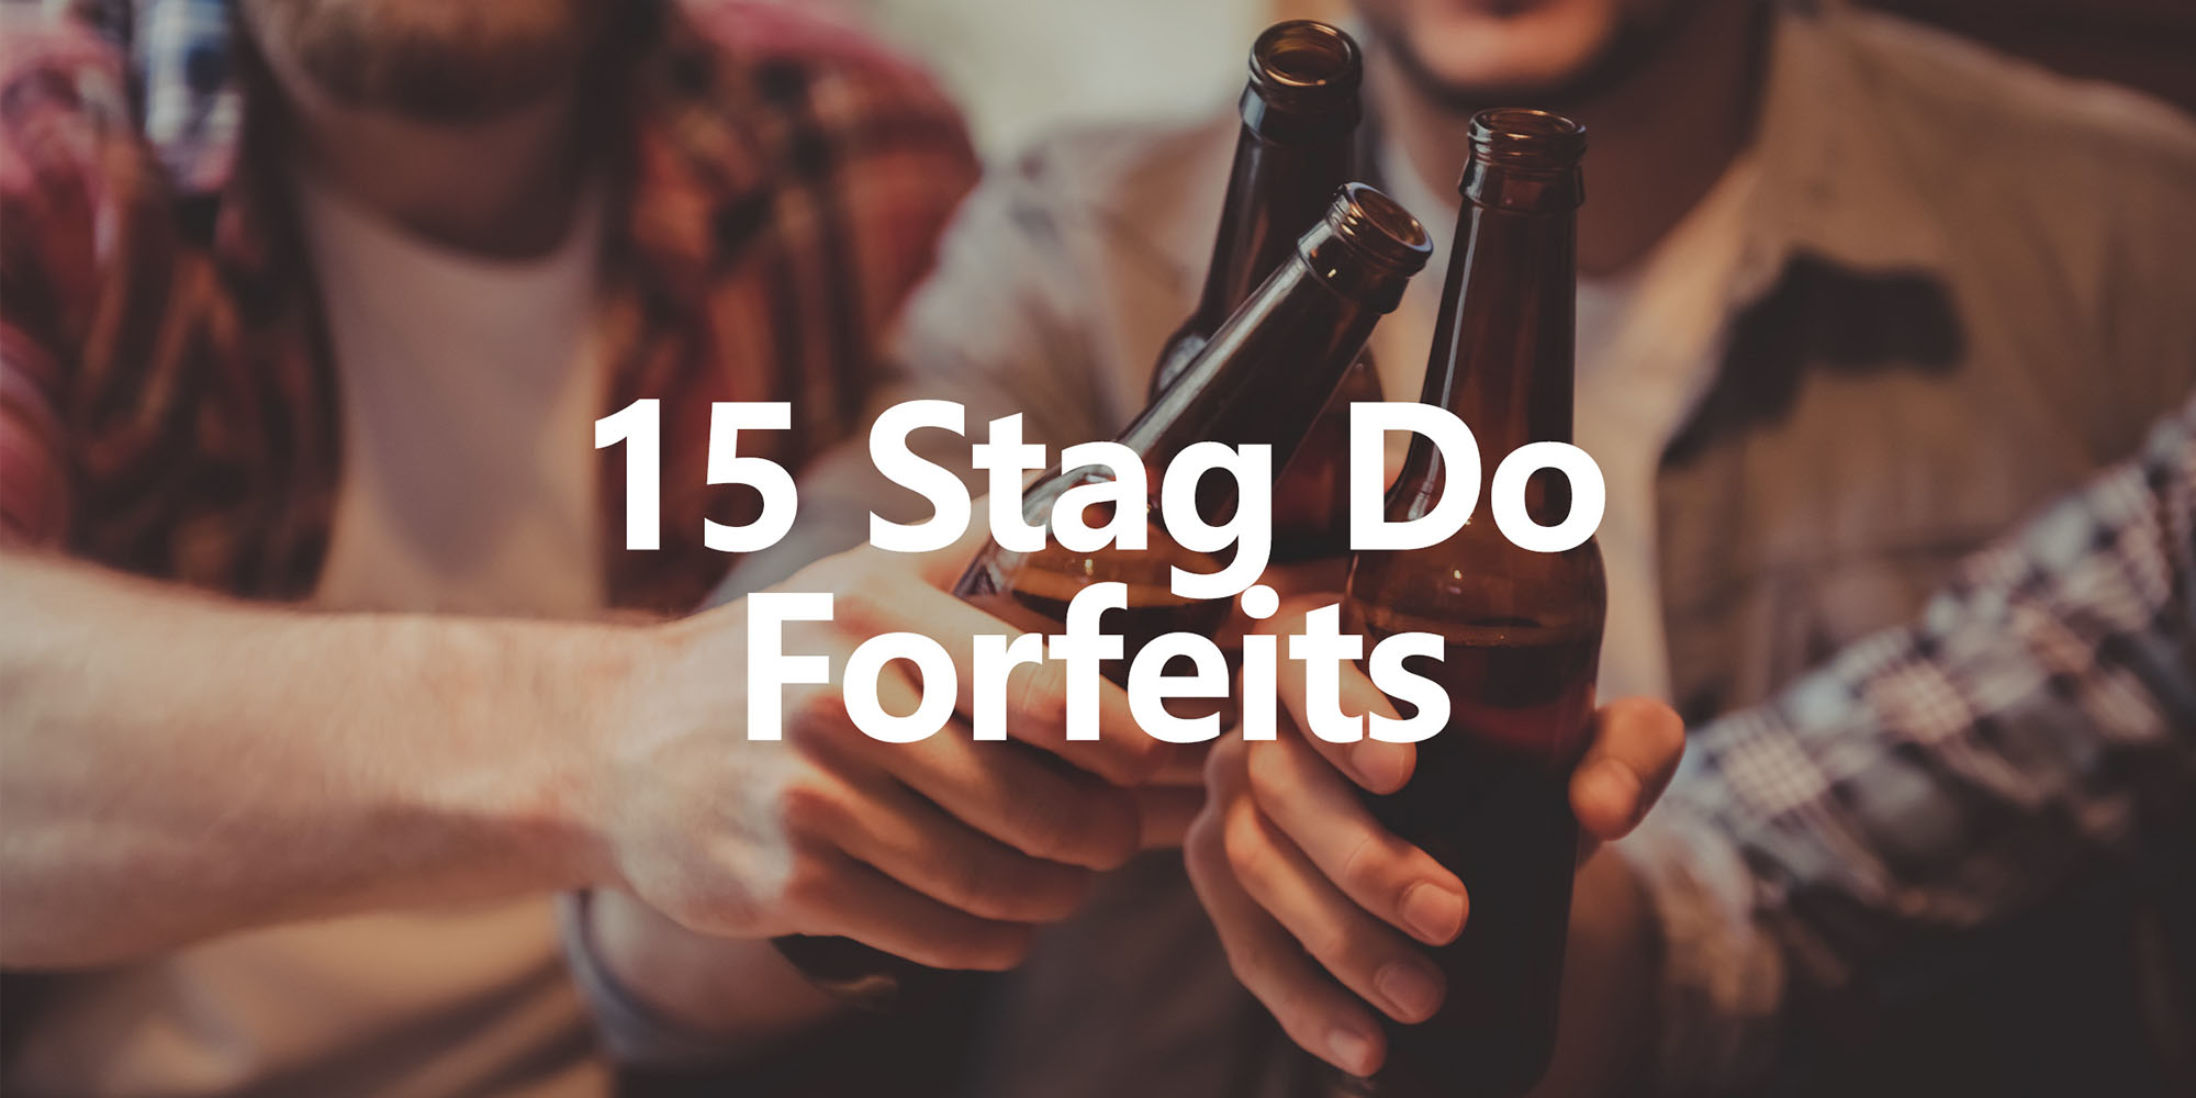 15 Stag Do Forfeits